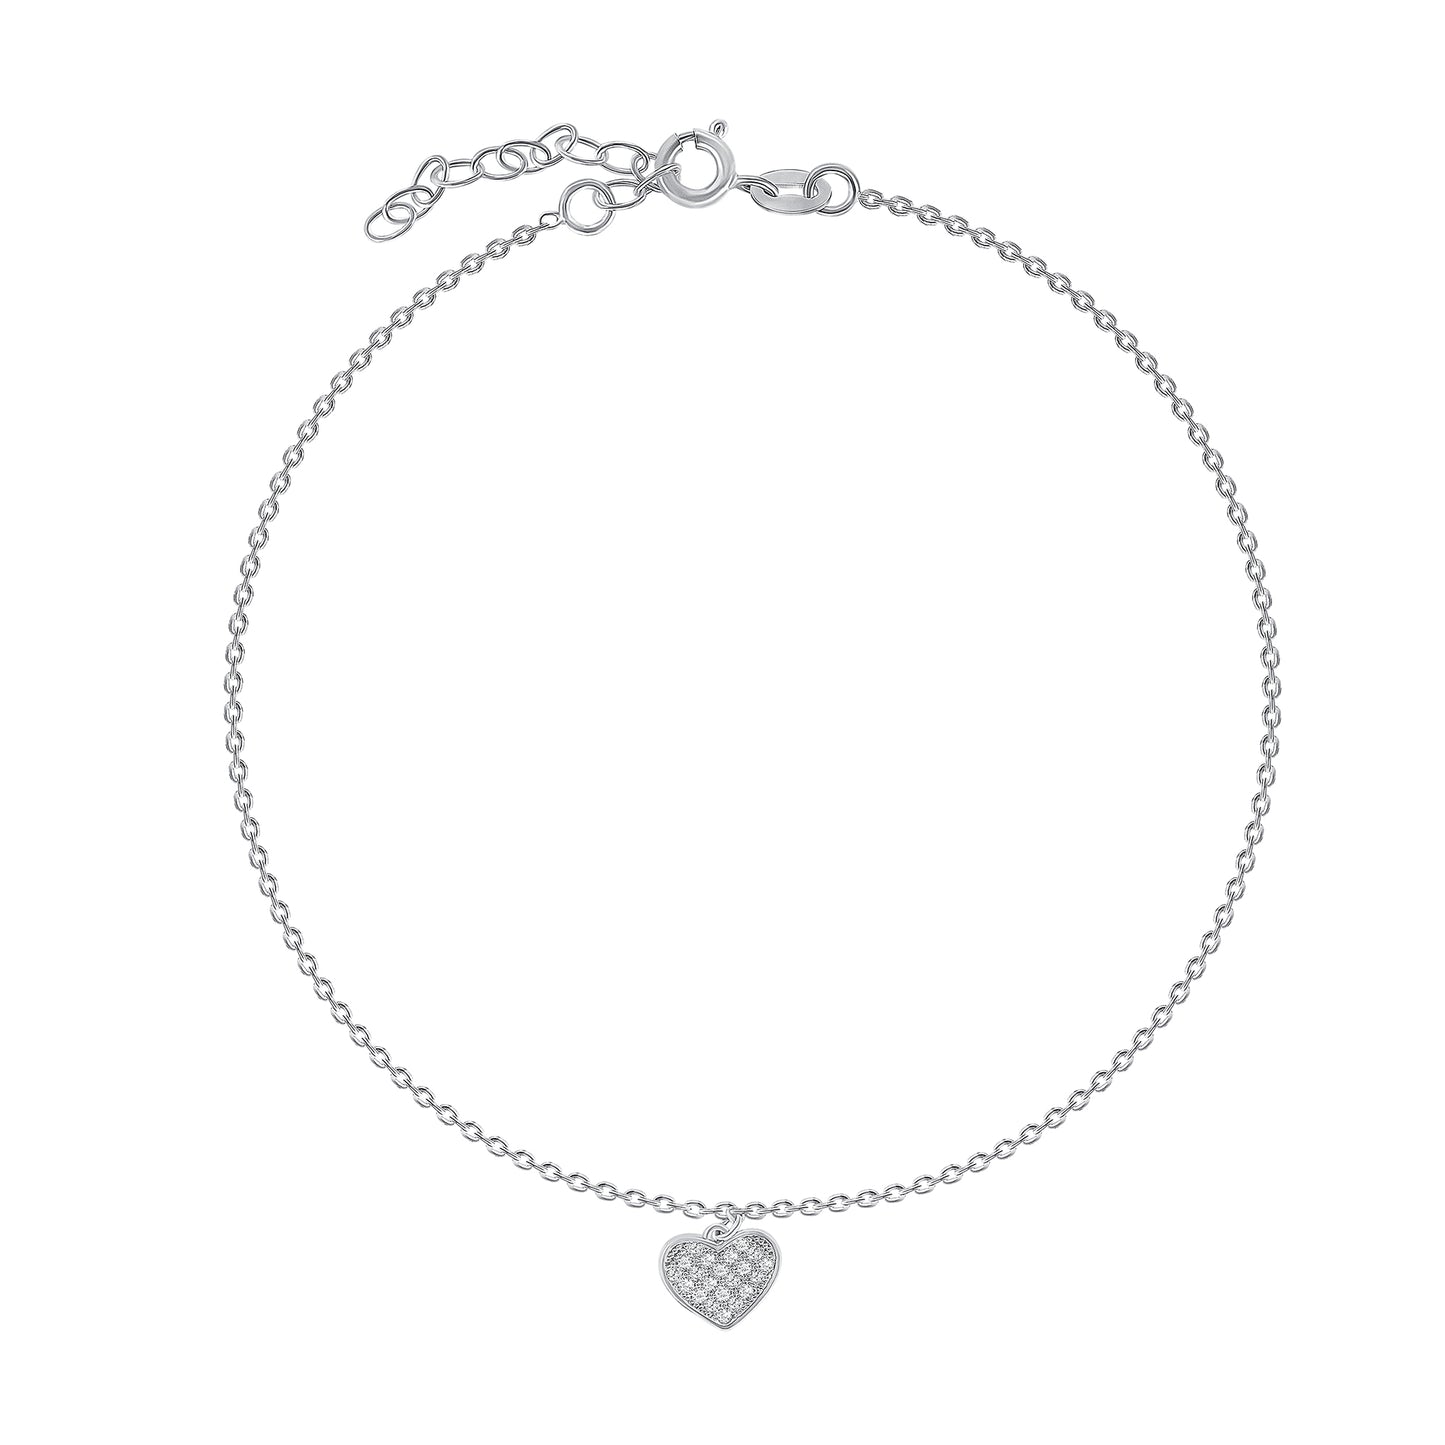 Silver 925 Cubic Zirconia Heart Charm Anklet. BF0176